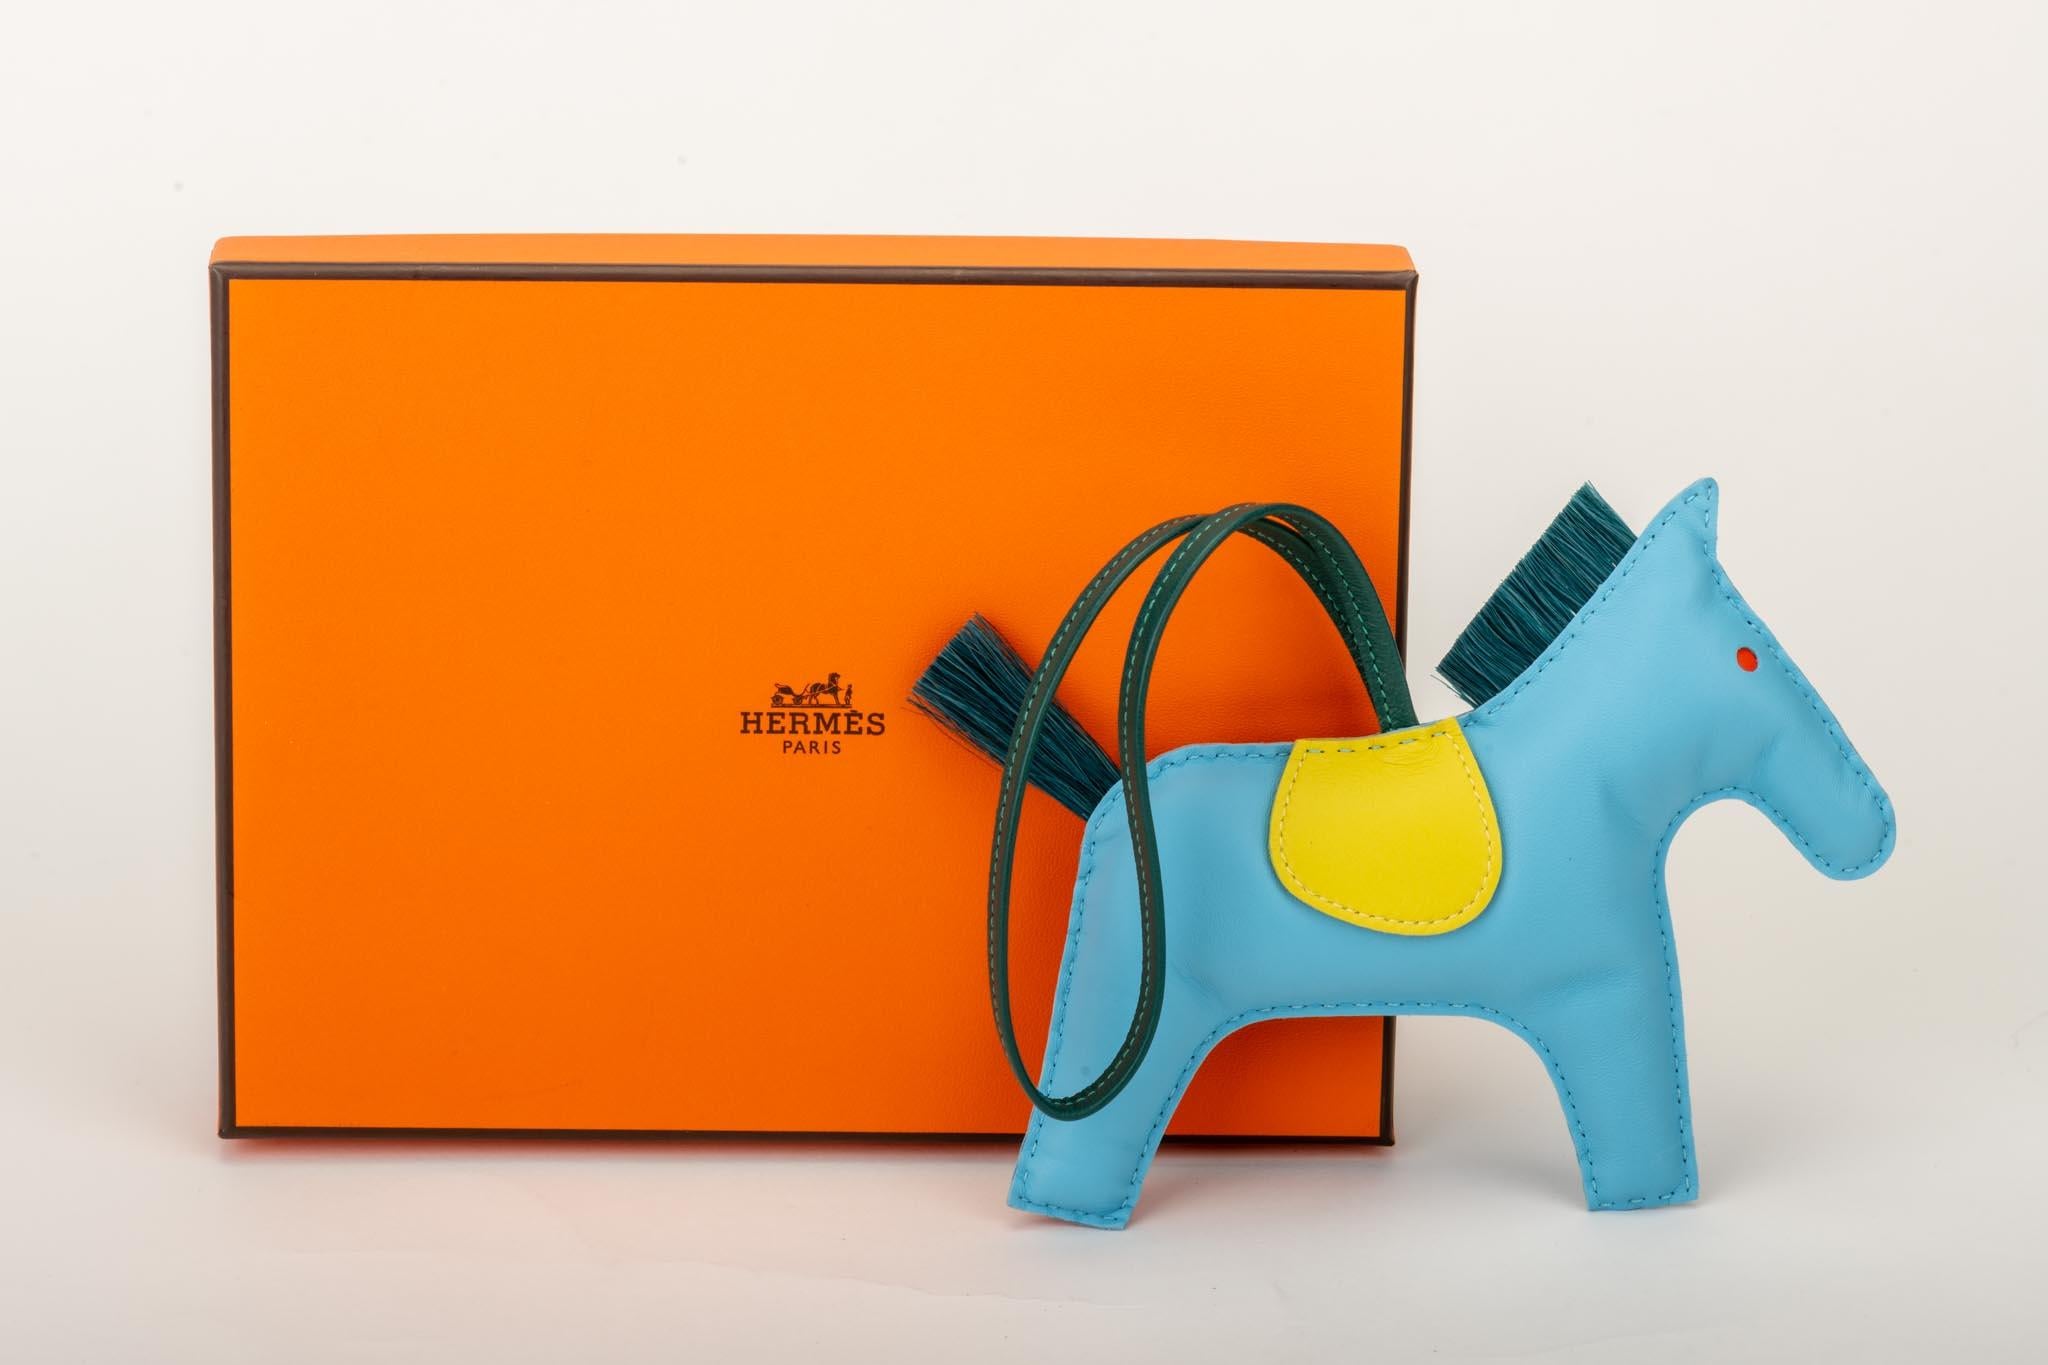 Hermès rare grigri rodeo collection charm in GM size. Turquoise, lemon and malachite leather. Limited edition with real pony hair tail. Comes with original box and ribbon.